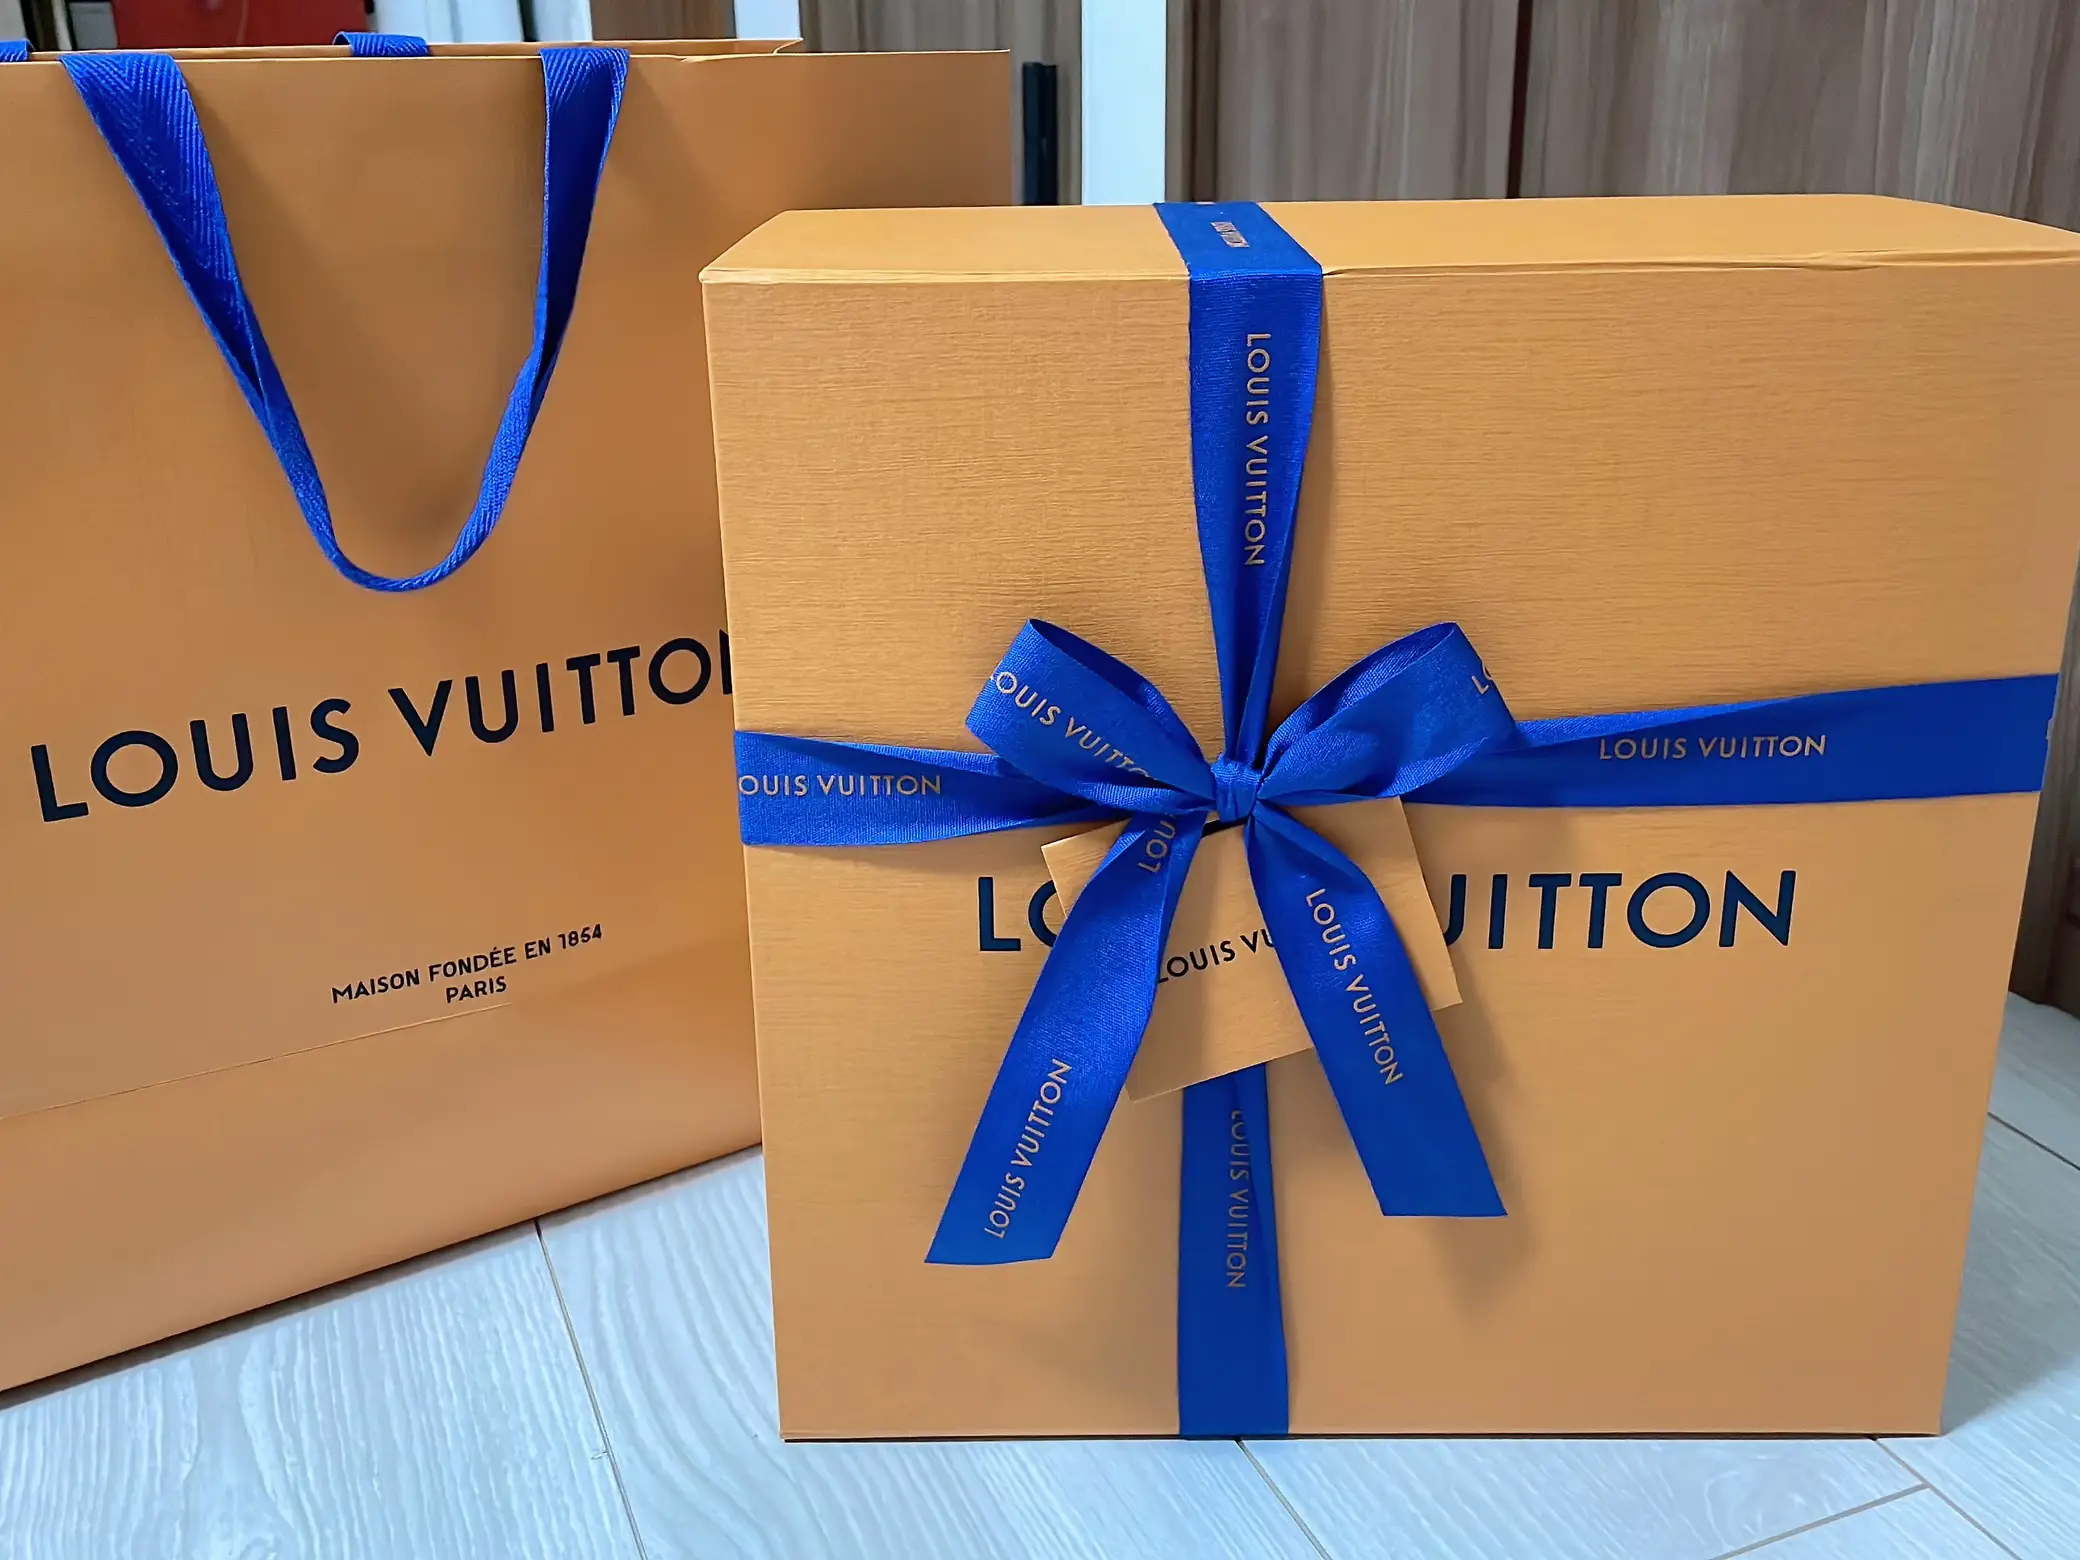 Full set: Louis Vuitton Box with Ribbon and Paper Bag